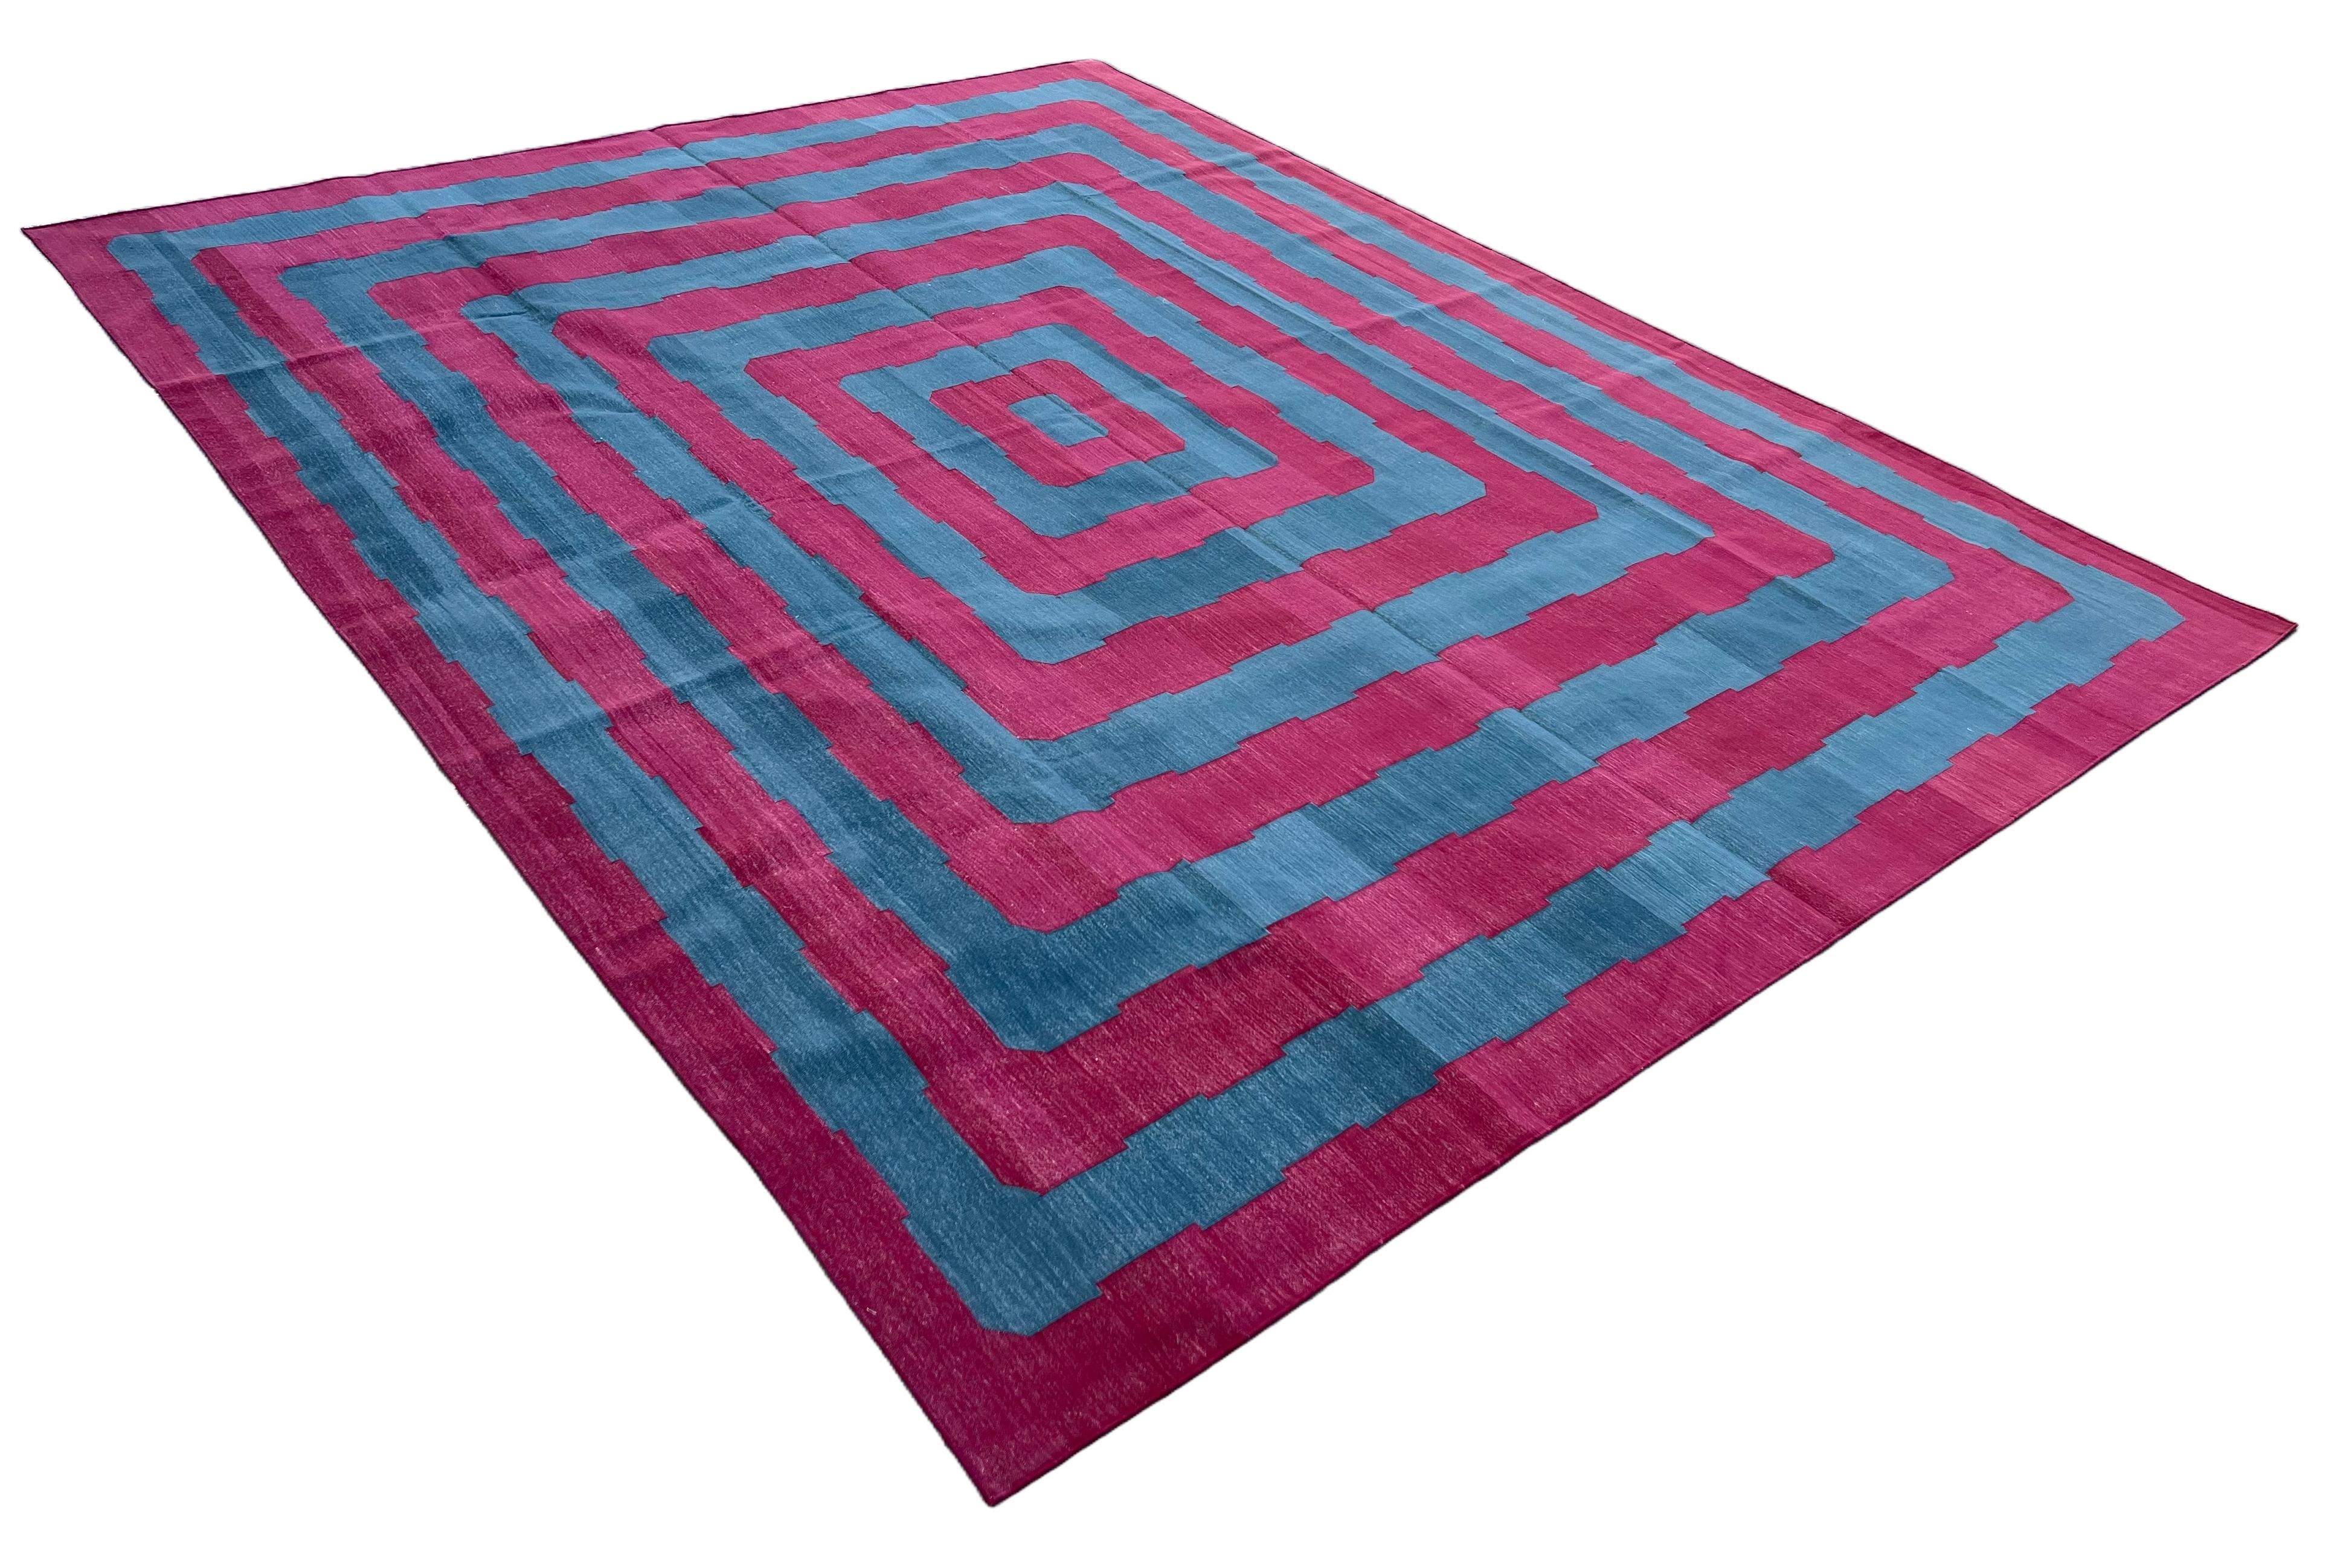 Cotton Vegetable Dyed Blue And Pink Geometric Striped Indian Dhurrie Rug-10'x14' 

These special flat-weave dhurries are hand-woven with 15 ply 100% cotton yarn. Due to the special manufacturing techniques used to create our rugs, the size and color